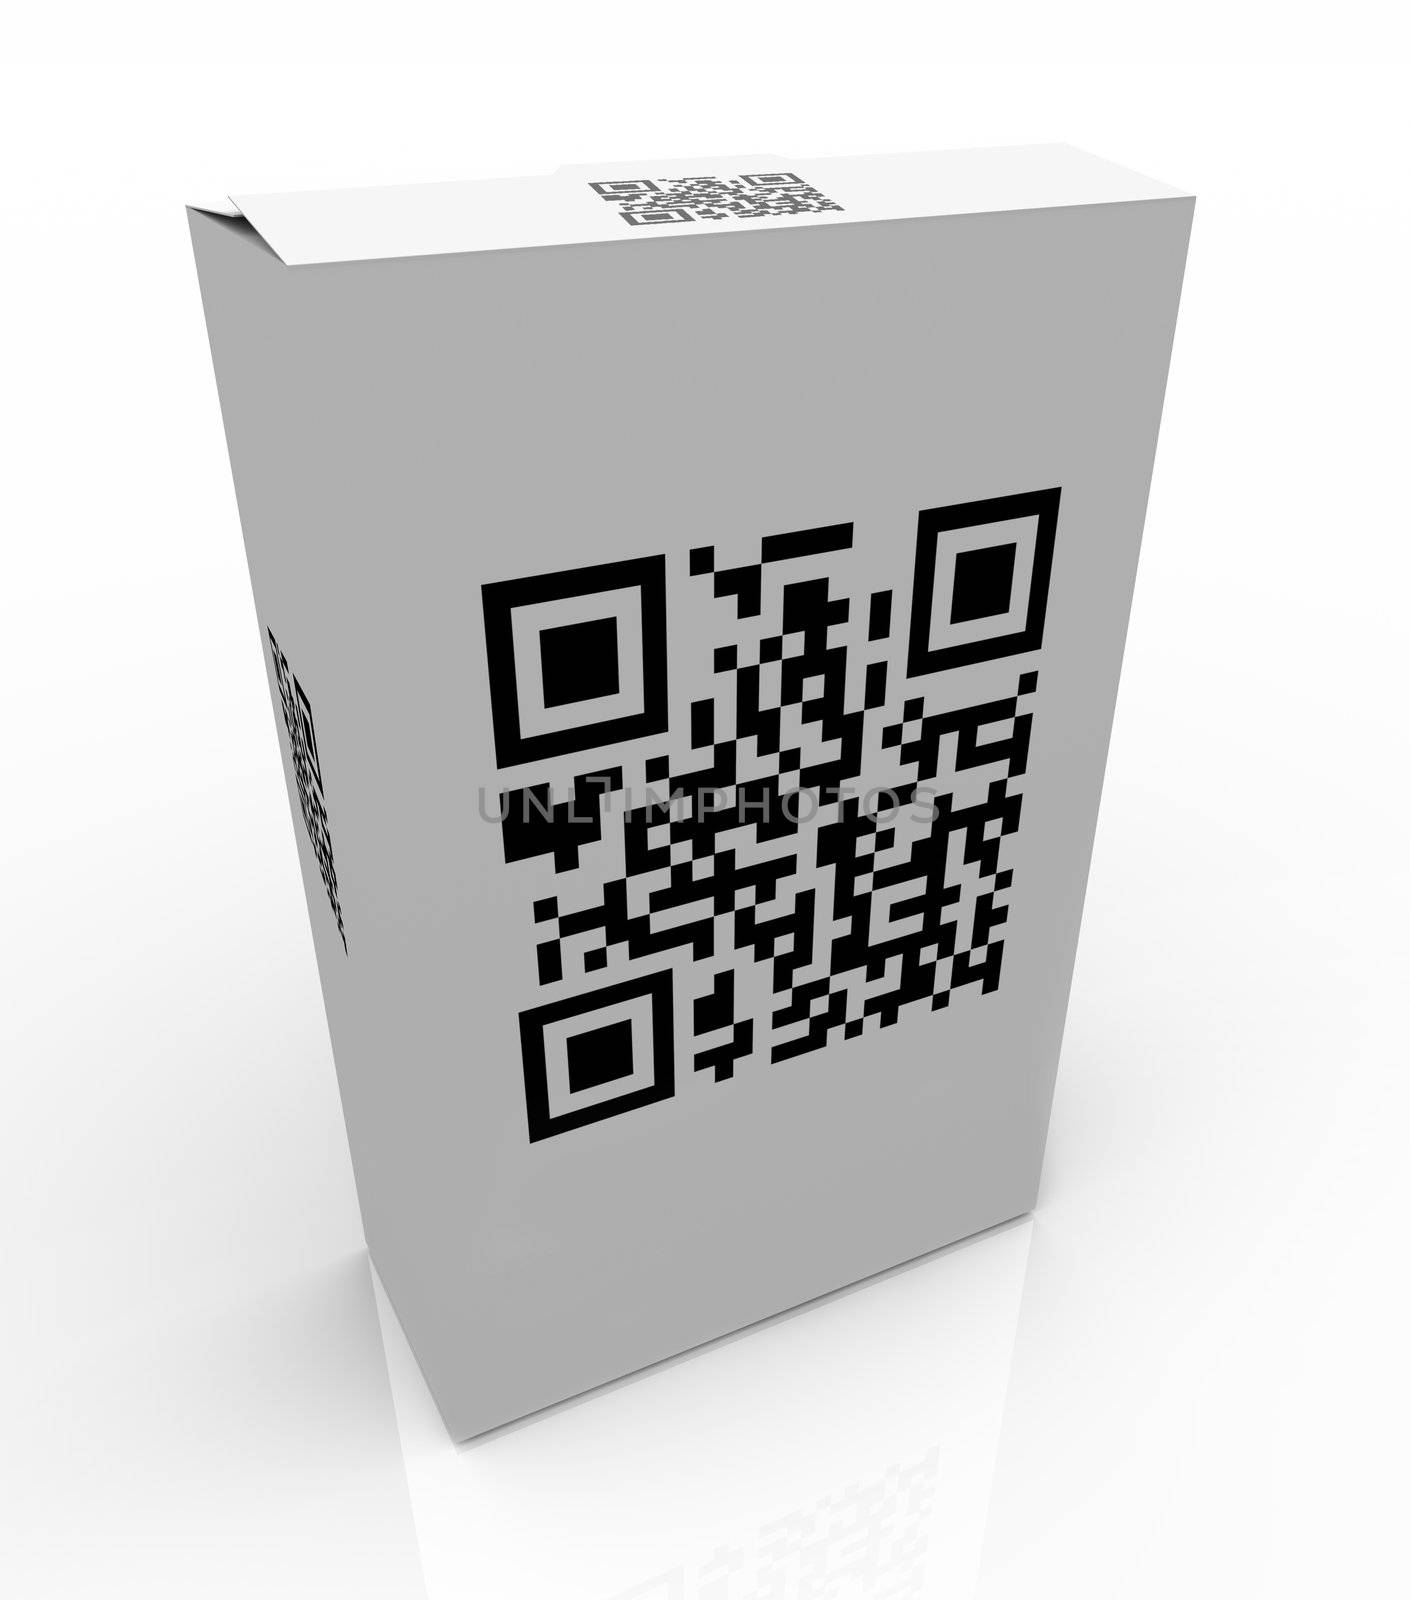 The QR Code on a product box allows you to scan the unique barcode and get special information on the product on your mobile smart phone or other device